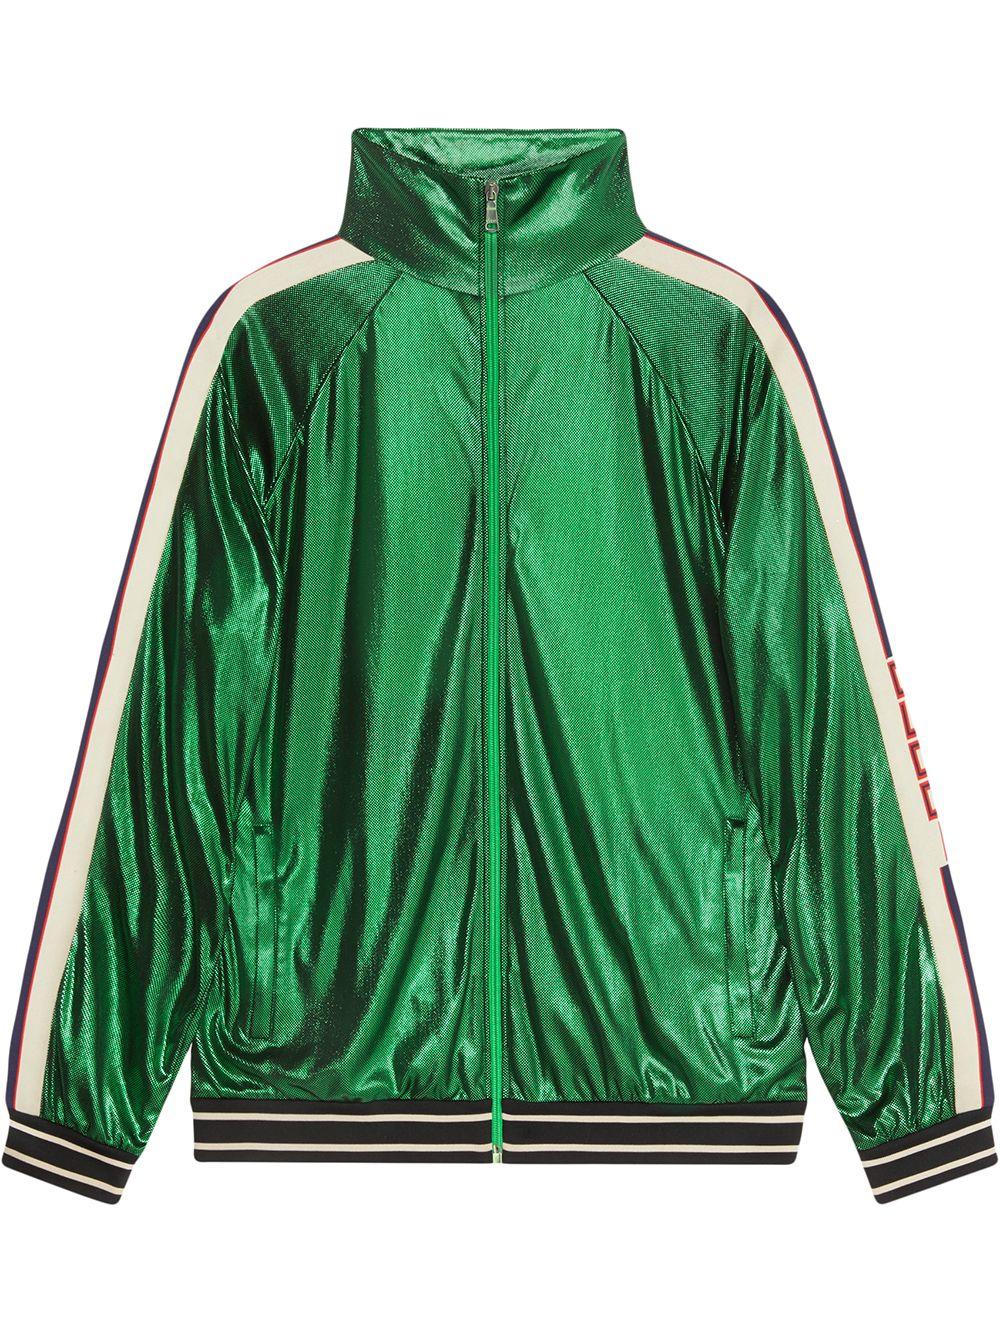 Gucci Oversize Laminated Jacket in Green for Men